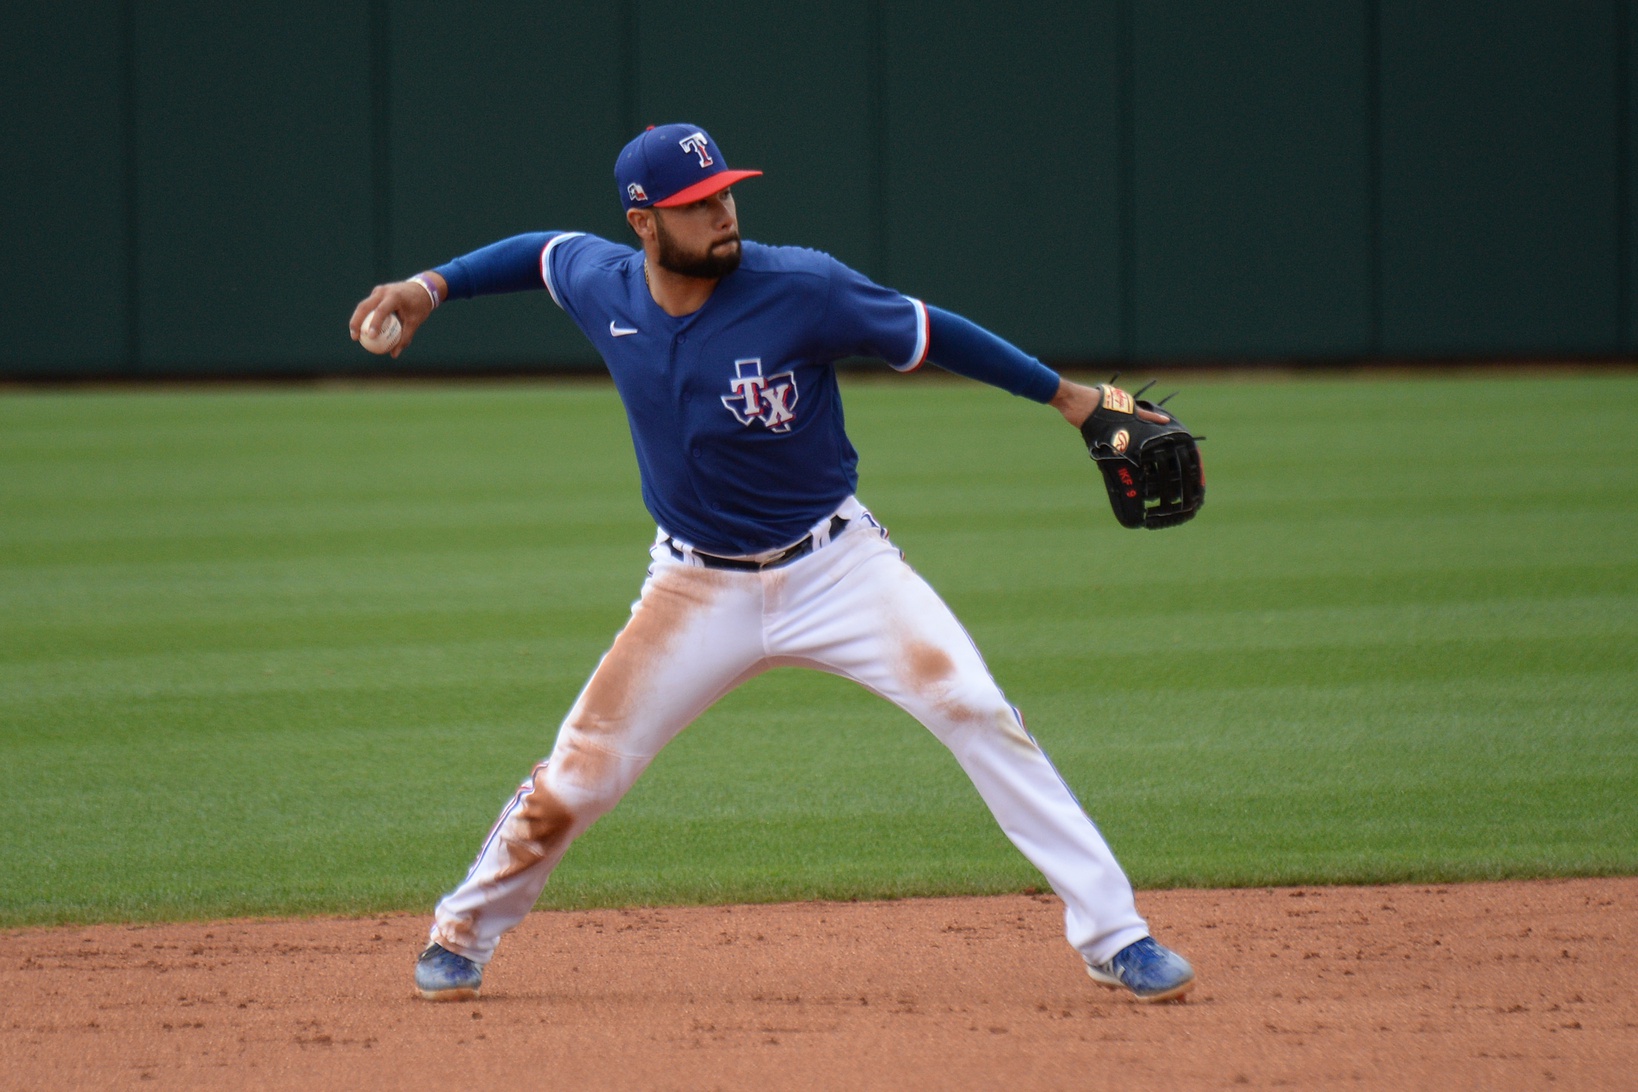 A matured Isiah Kiner-Falefa has secured a role with the Rangers